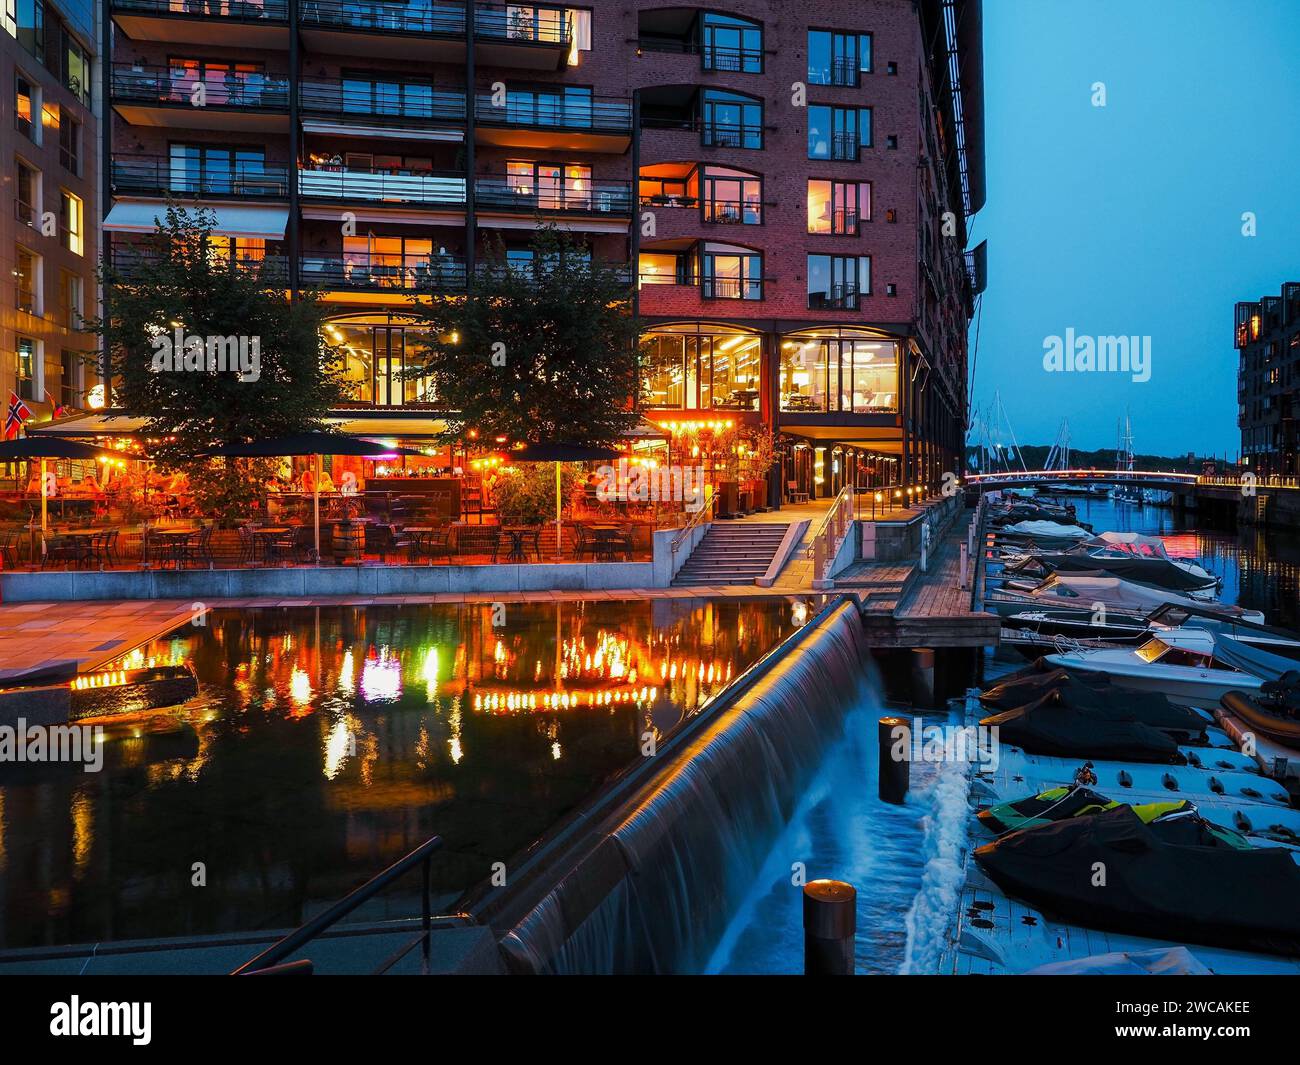 new city residential buildings and restaurants on water in dock and moored watercrafts near, contemporary architecture in Oslo city, Norway Stock Photo